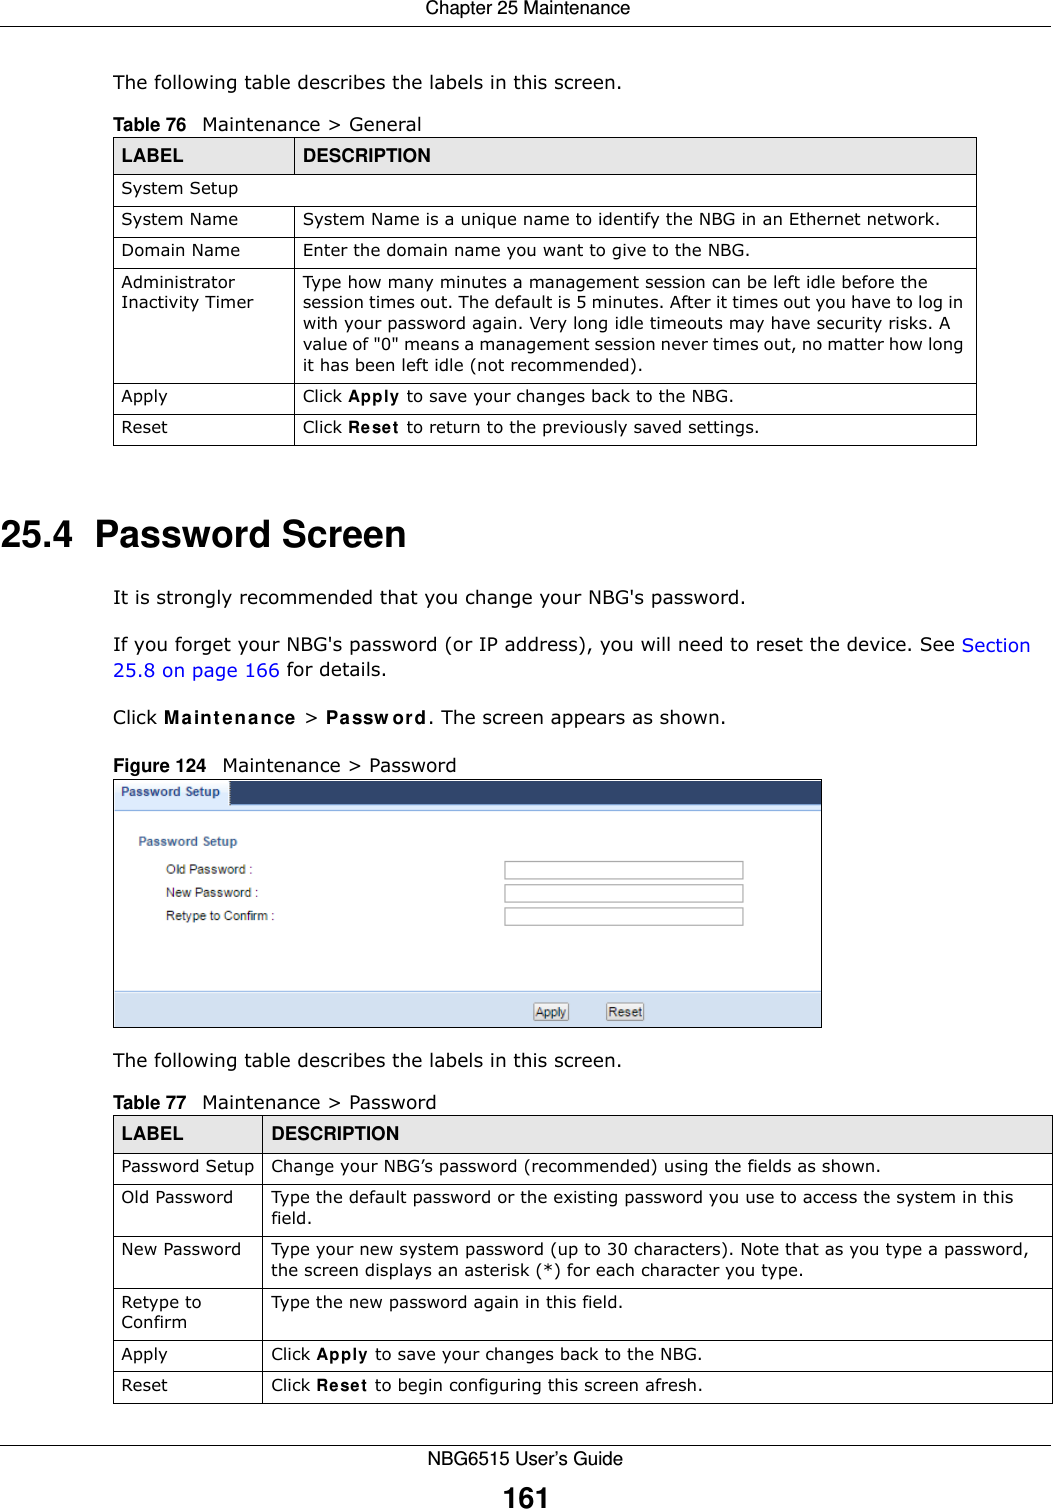  Chapter 25 MaintenanceNBG6515 User’s Guide161The following table describes the labels in this screen.25.4  Password ScreenIt is strongly recommended that you change your NBG&apos;s password. If you forget your NBG&apos;s password (or IP address), you will need to reset the device. See Section 25.8 on page 166 for details.Click Maintenance &gt; Password. The screen appears as shown.Figure 124   Maintenance &gt; Password The following table describes the labels in this screen.Table 76   Maintenance &gt; GeneralLABEL DESCRIPTIONSystem SetupSystem Name System Name is a unique name to identify the NBG in an Ethernet network.Domain Name Enter the domain name you want to give to the NBG.Administrator Inactivity TimerType how many minutes a management session can be left idle before the session times out. The default is 5 minutes. After it times out you have to log in with your password again. Very long idle timeouts may have security risks. A value of &quot;0&quot; means a management session never times out, no matter how long it has been left idle (not recommended).Apply Click Apply to save your changes back to the NBG.Reset Click Reset to return to the previously saved settings.Table 77   Maintenance &gt; PasswordLABEL DESCRIPTIONPassword Setup Change your NBG’s password (recommended) using the fields as shown.Old Password Type the default password or the existing password you use to access the system in this field.New Password Type your new system password (up to 30 characters). Note that as you type a password, the screen displays an asterisk (*) for each character you type.Retype to ConfirmType the new password again in this field.Apply Click Apply to save your changes back to the NBG.Reset Click Reset to begin configuring this screen afresh.